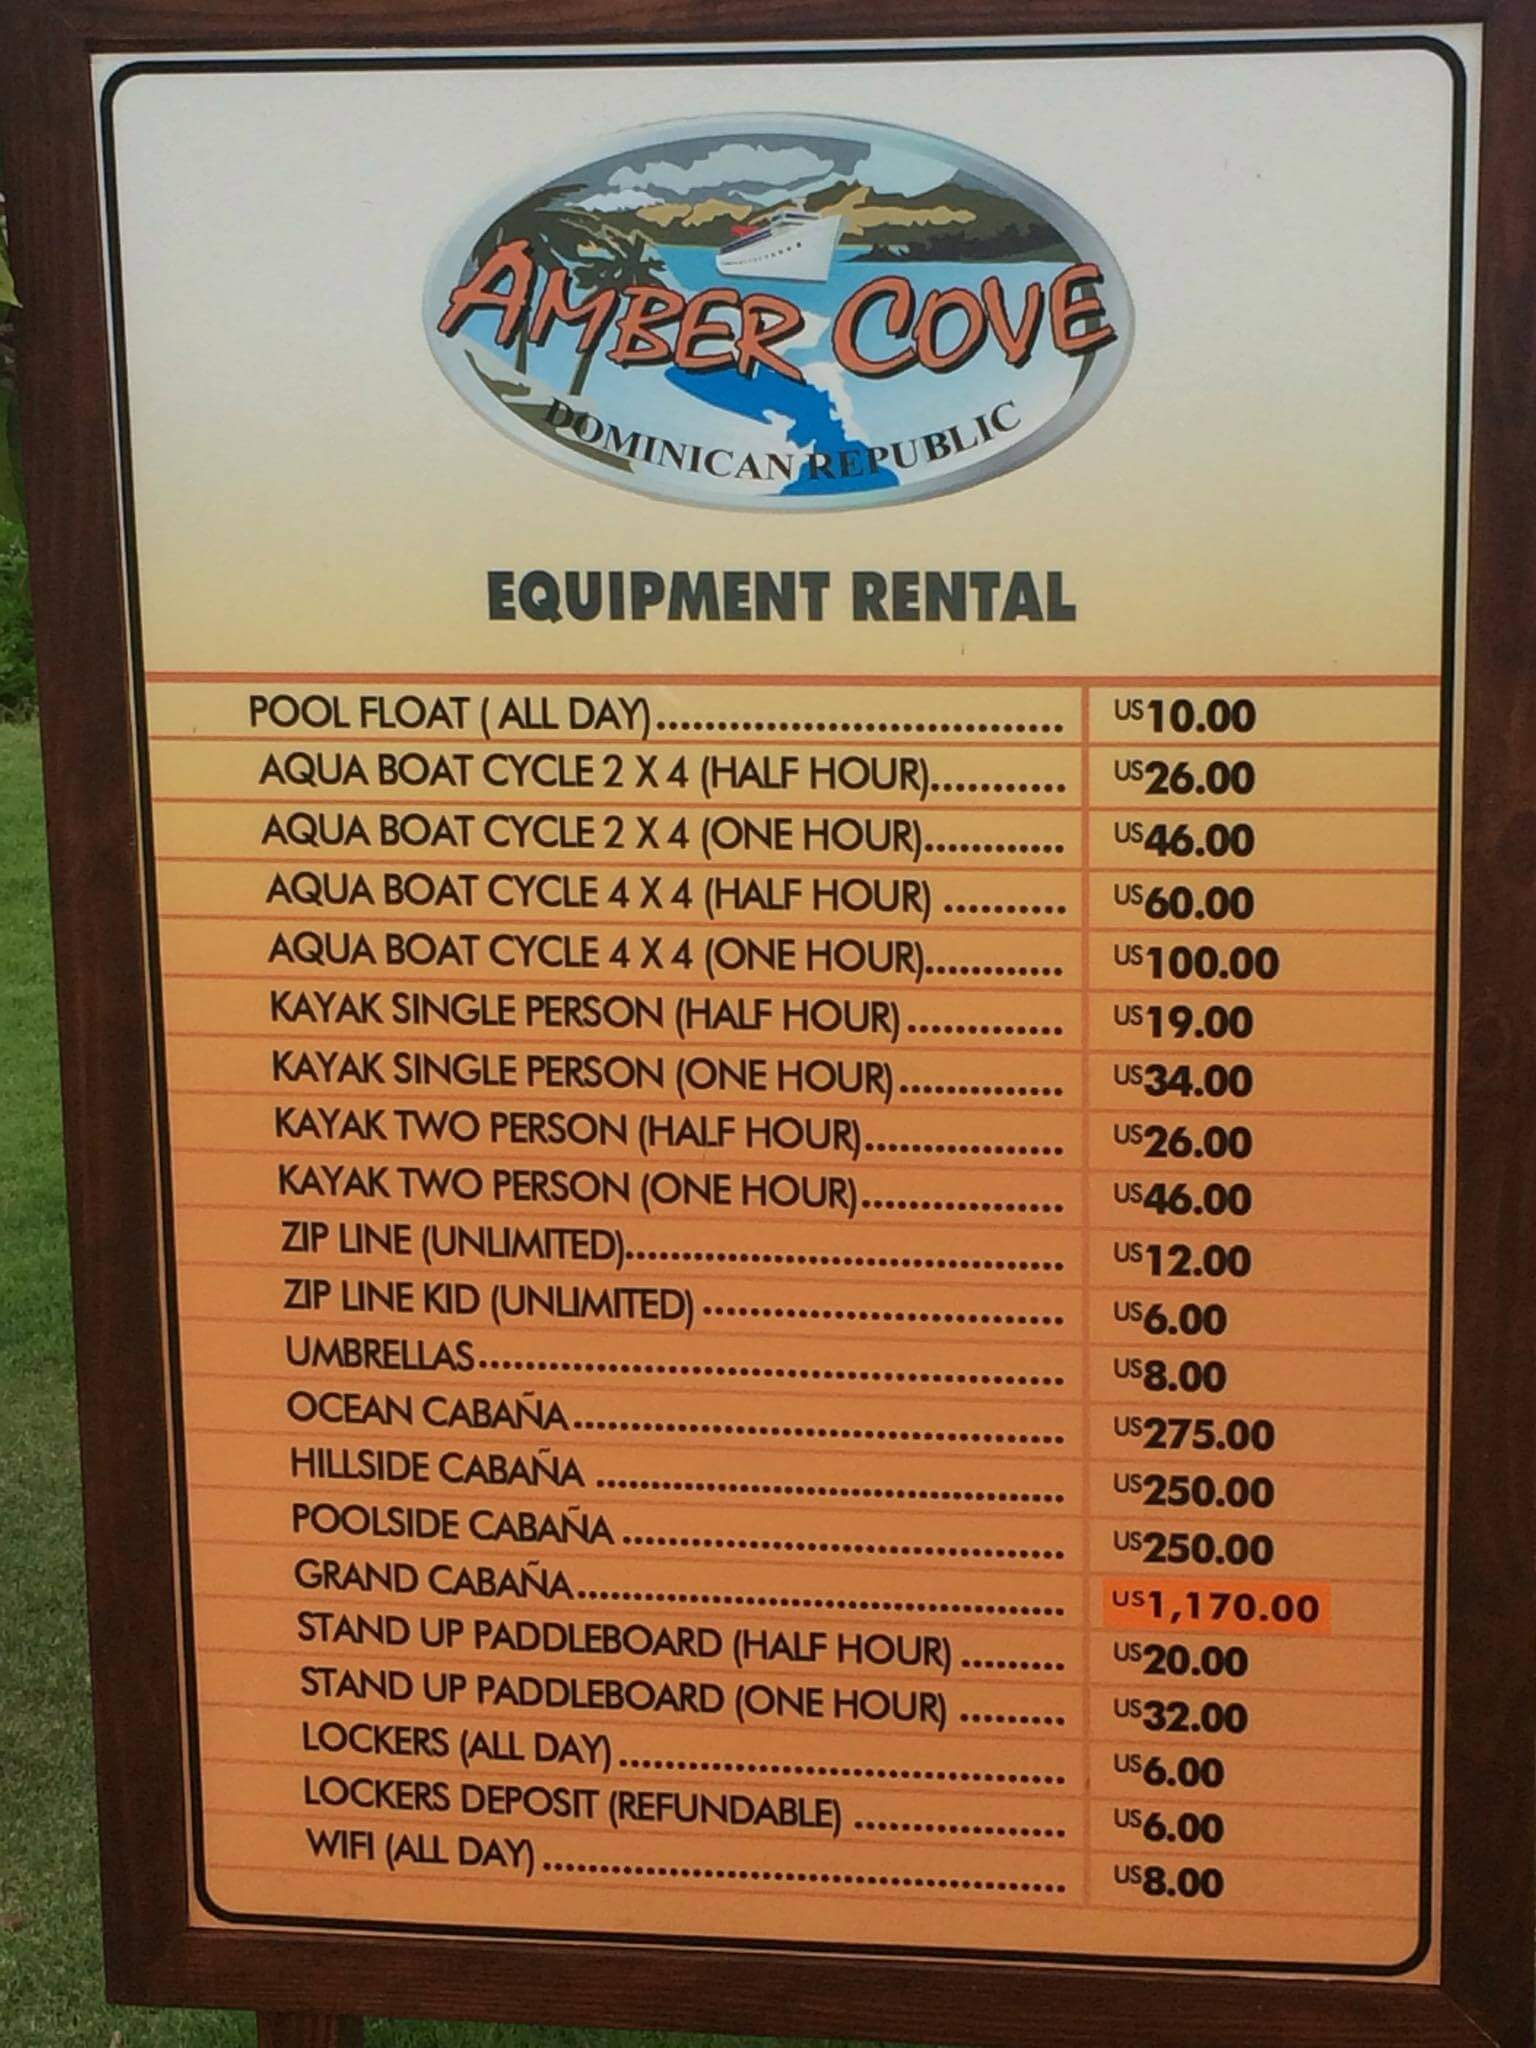 Amber Cove Equipment Rental Prices and Cabana Prices.